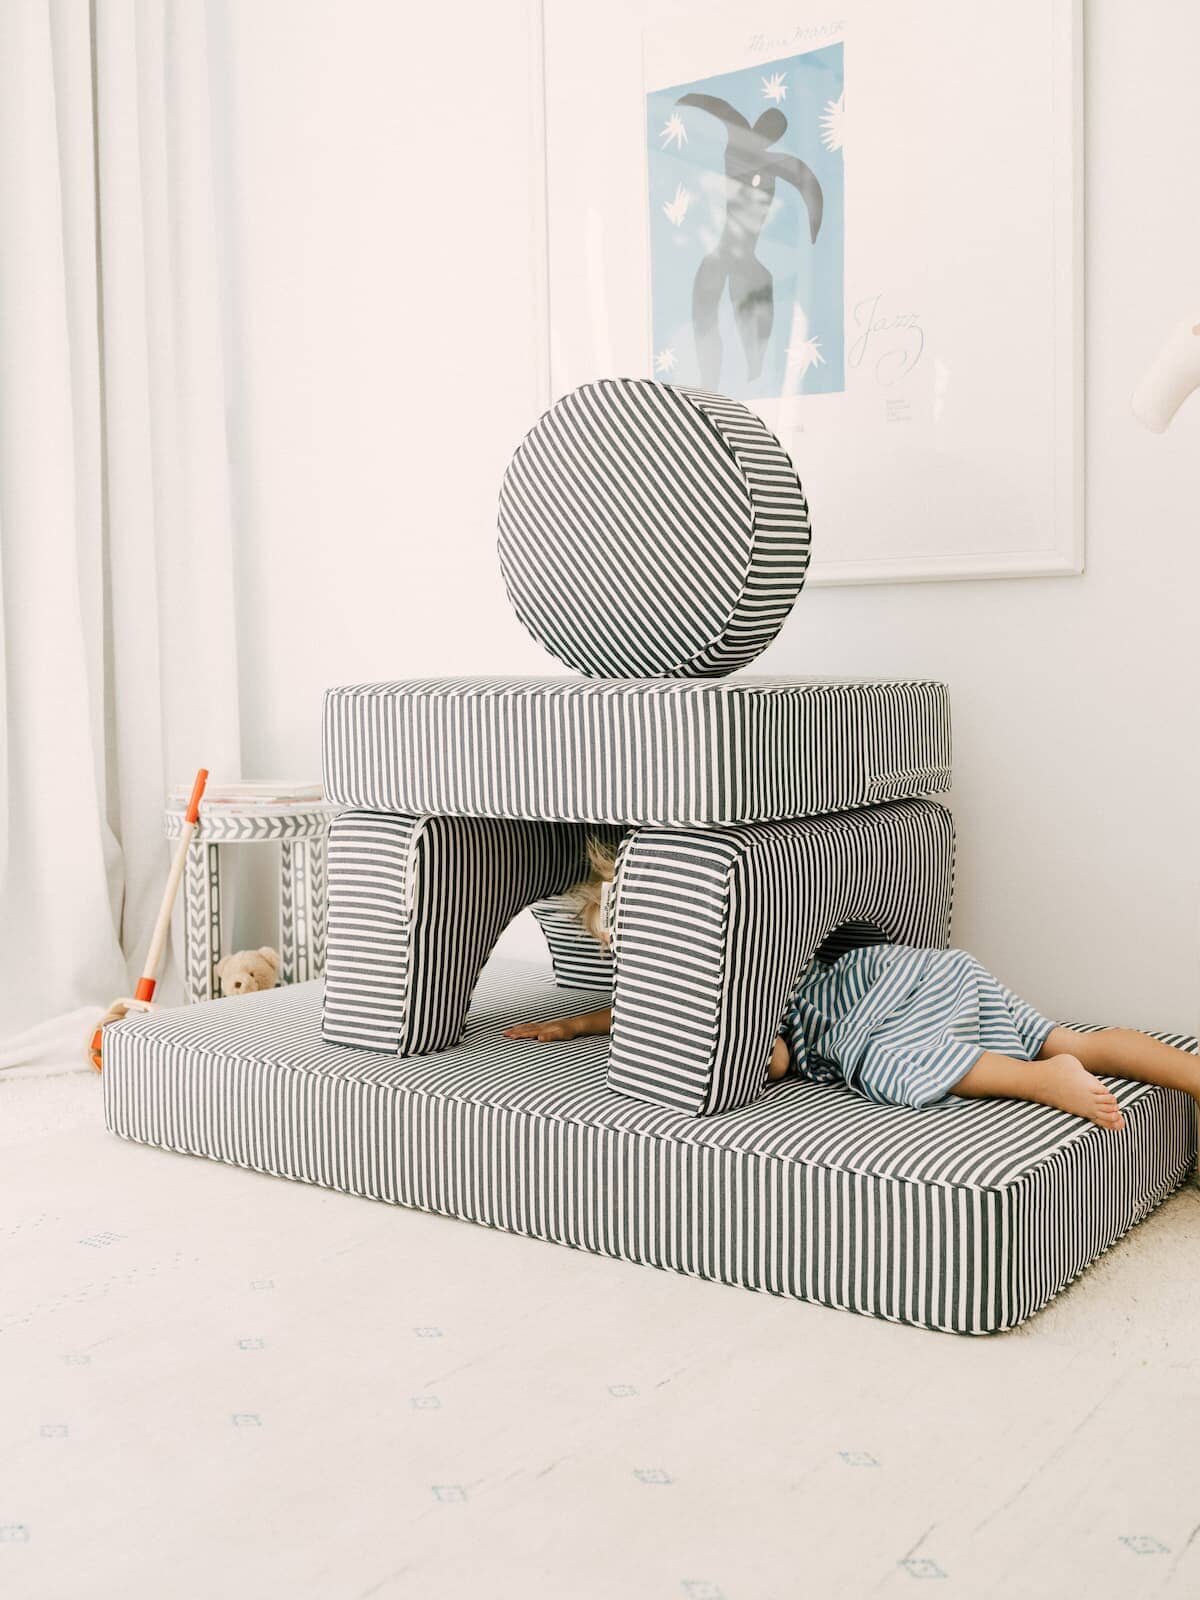 child climbing through pillow stack in bedroom